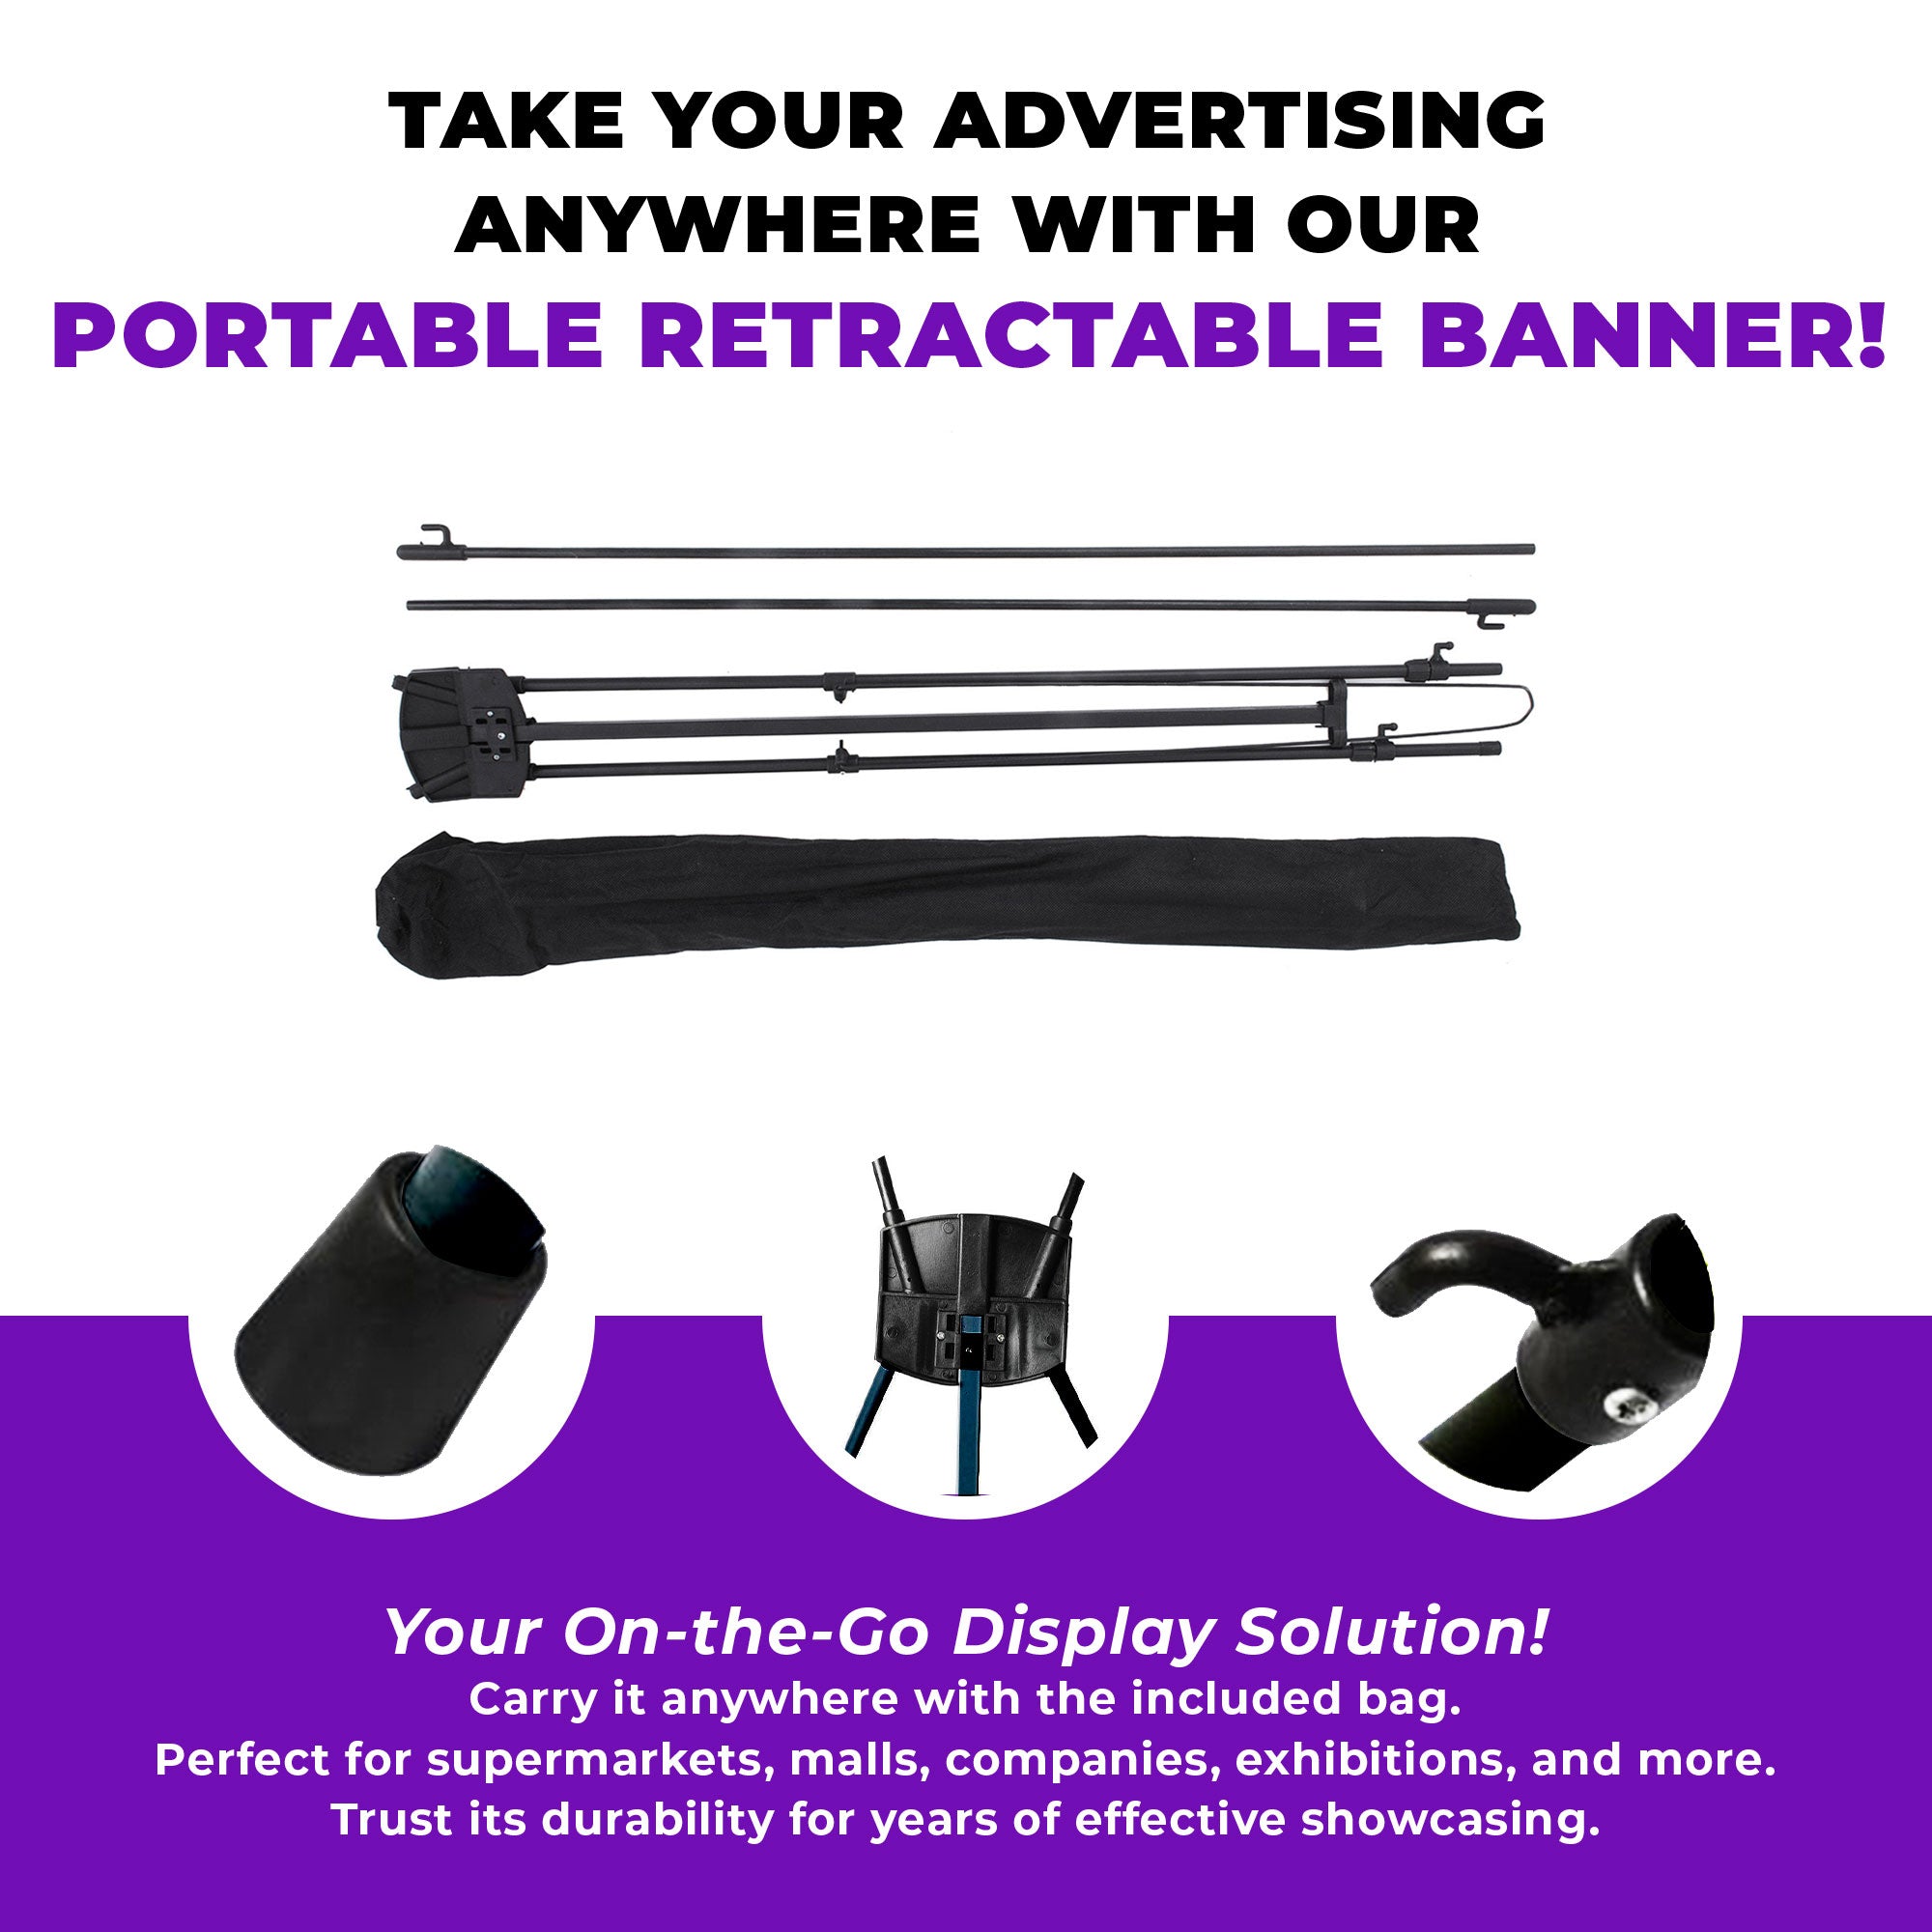 X Banner STAND ONLY